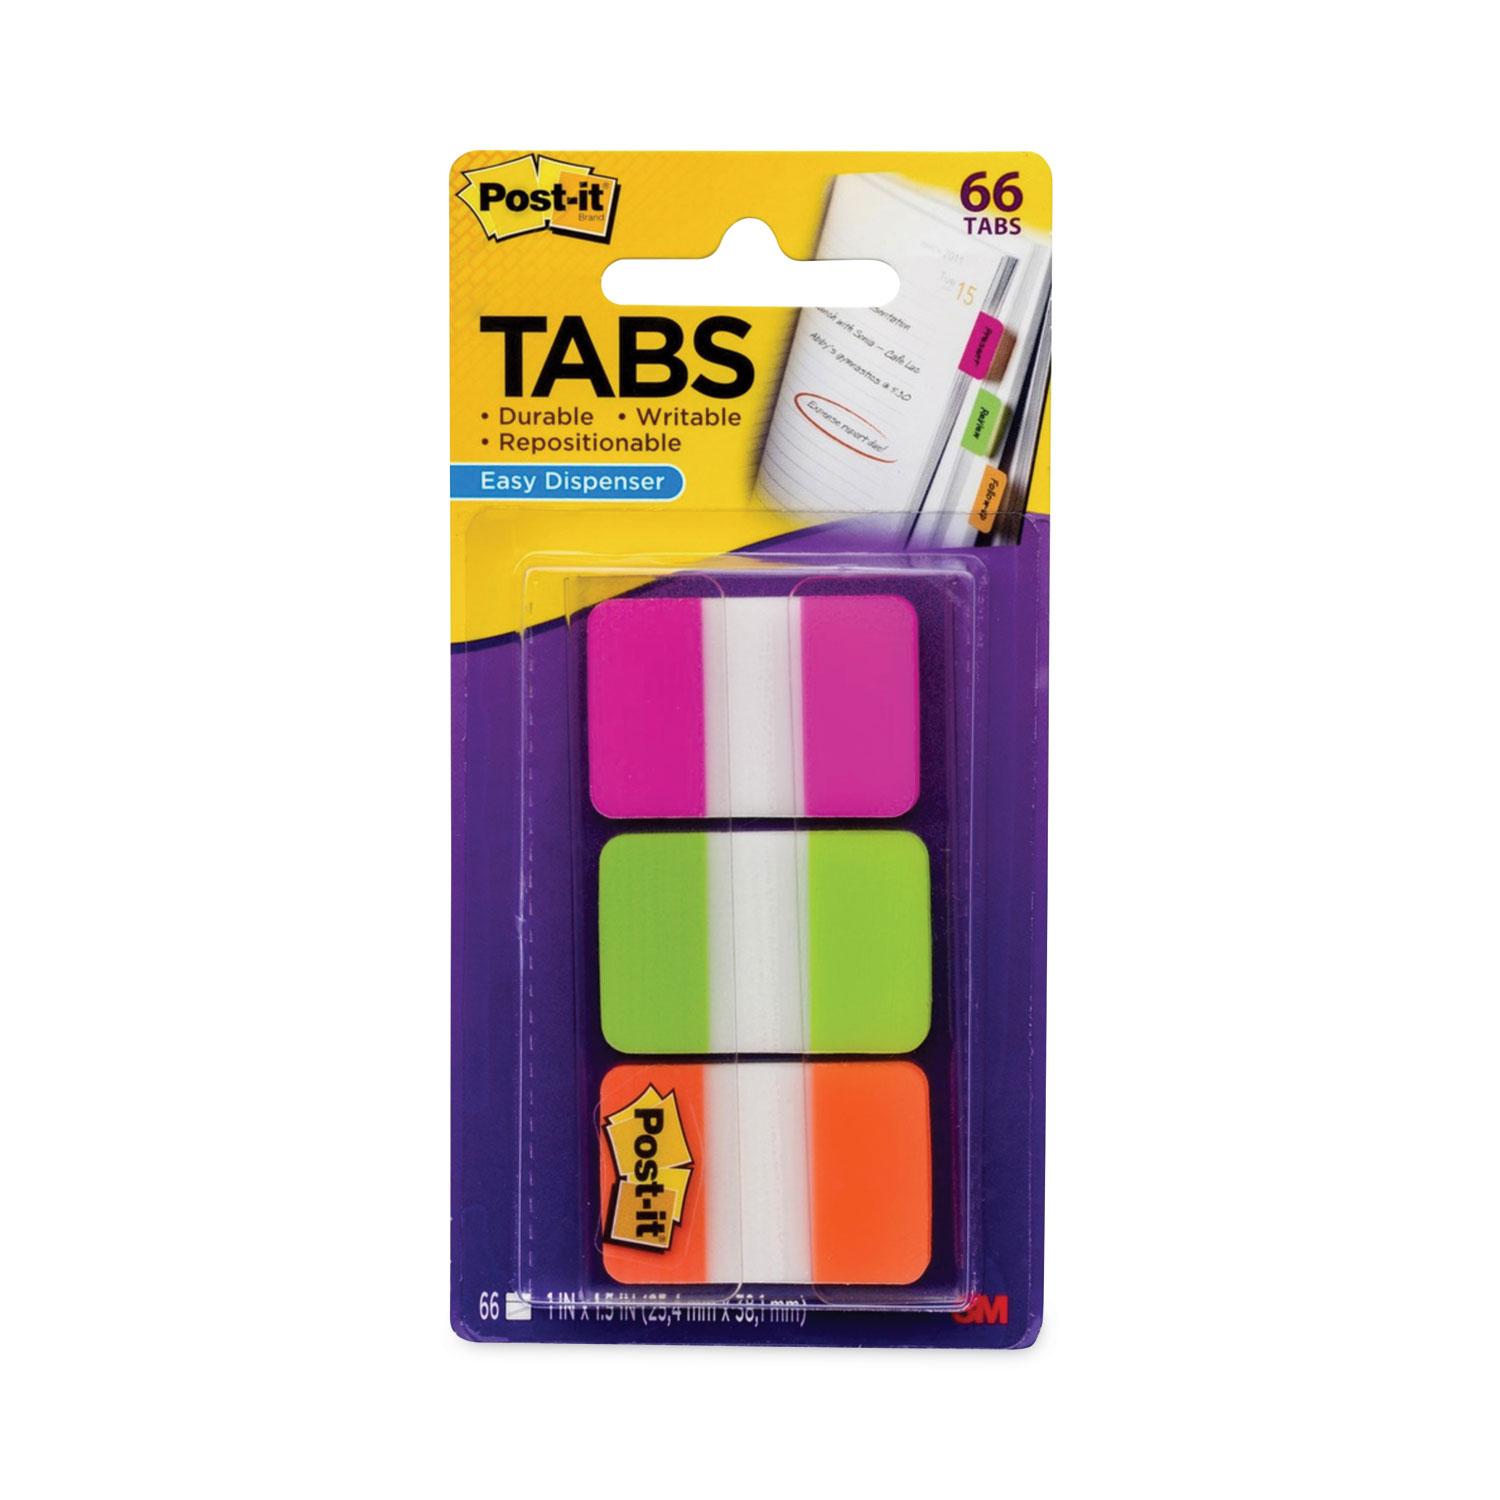 Washable Dry Erase Crayons w/E-Z Erase Cloth, Assorted Neon Colors, 8/Pack  - Office Express Office Products